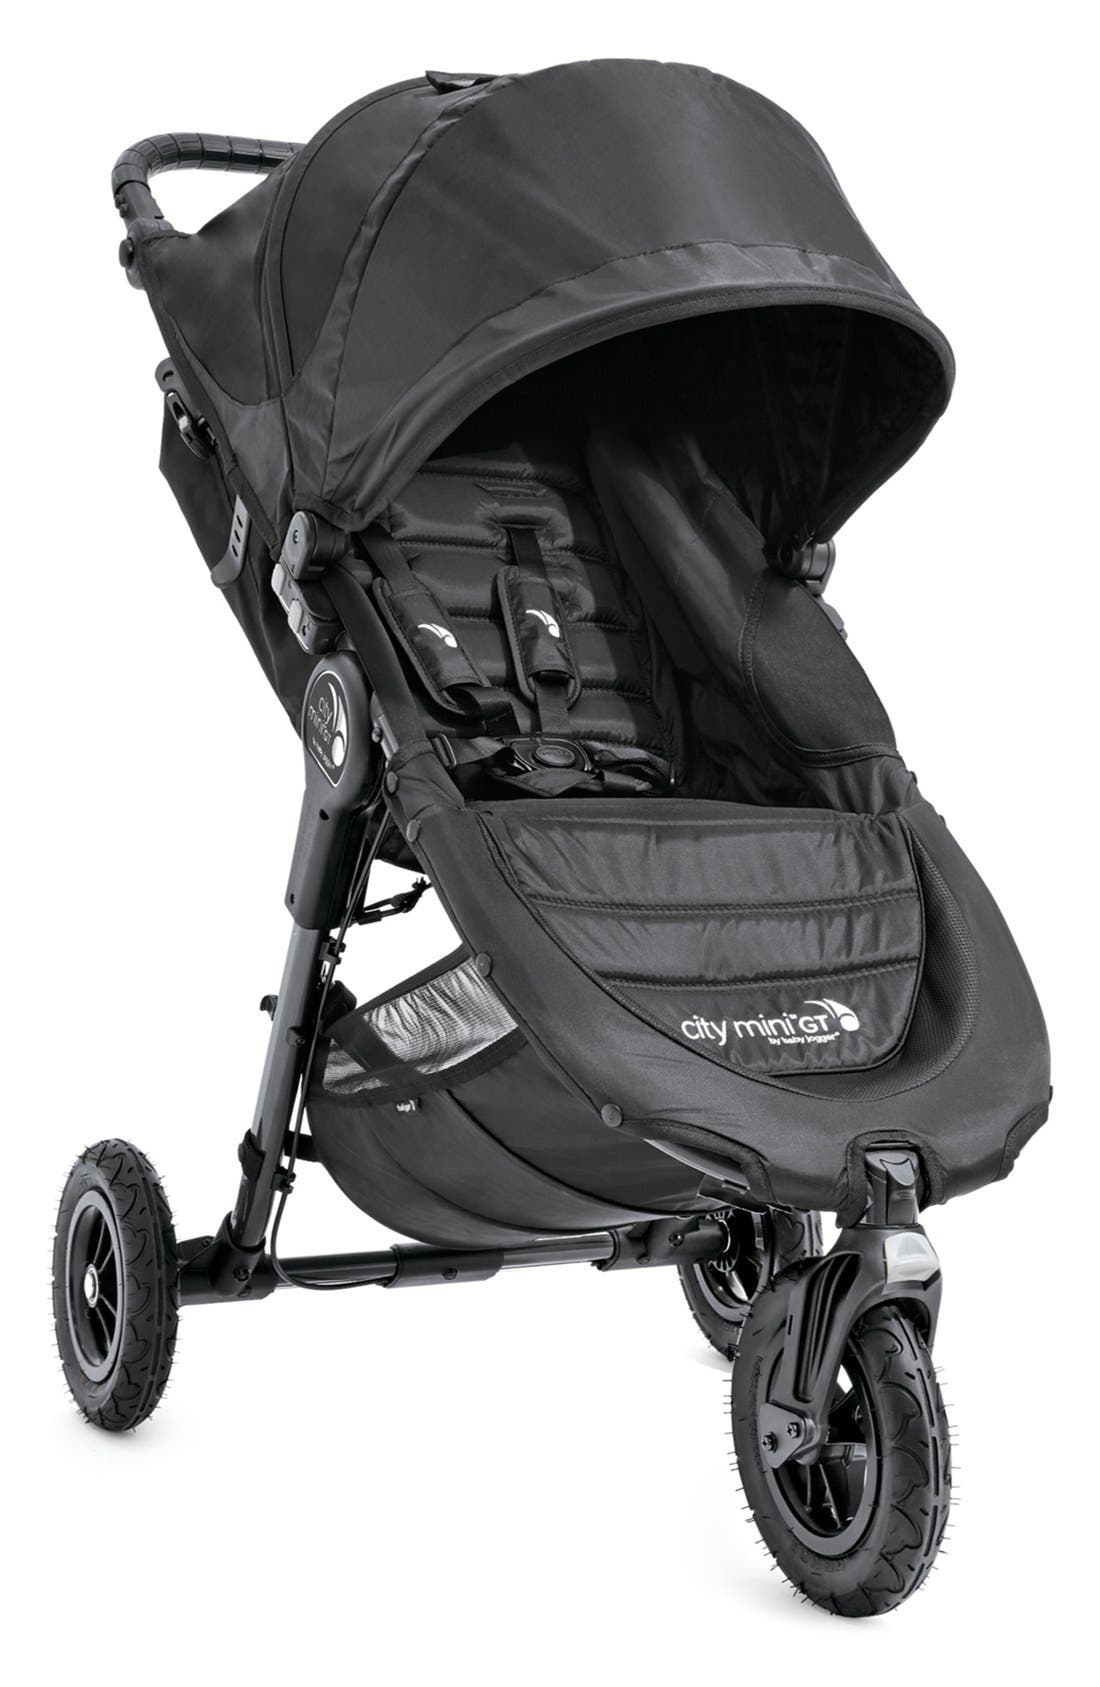 nordstrom baby jogger